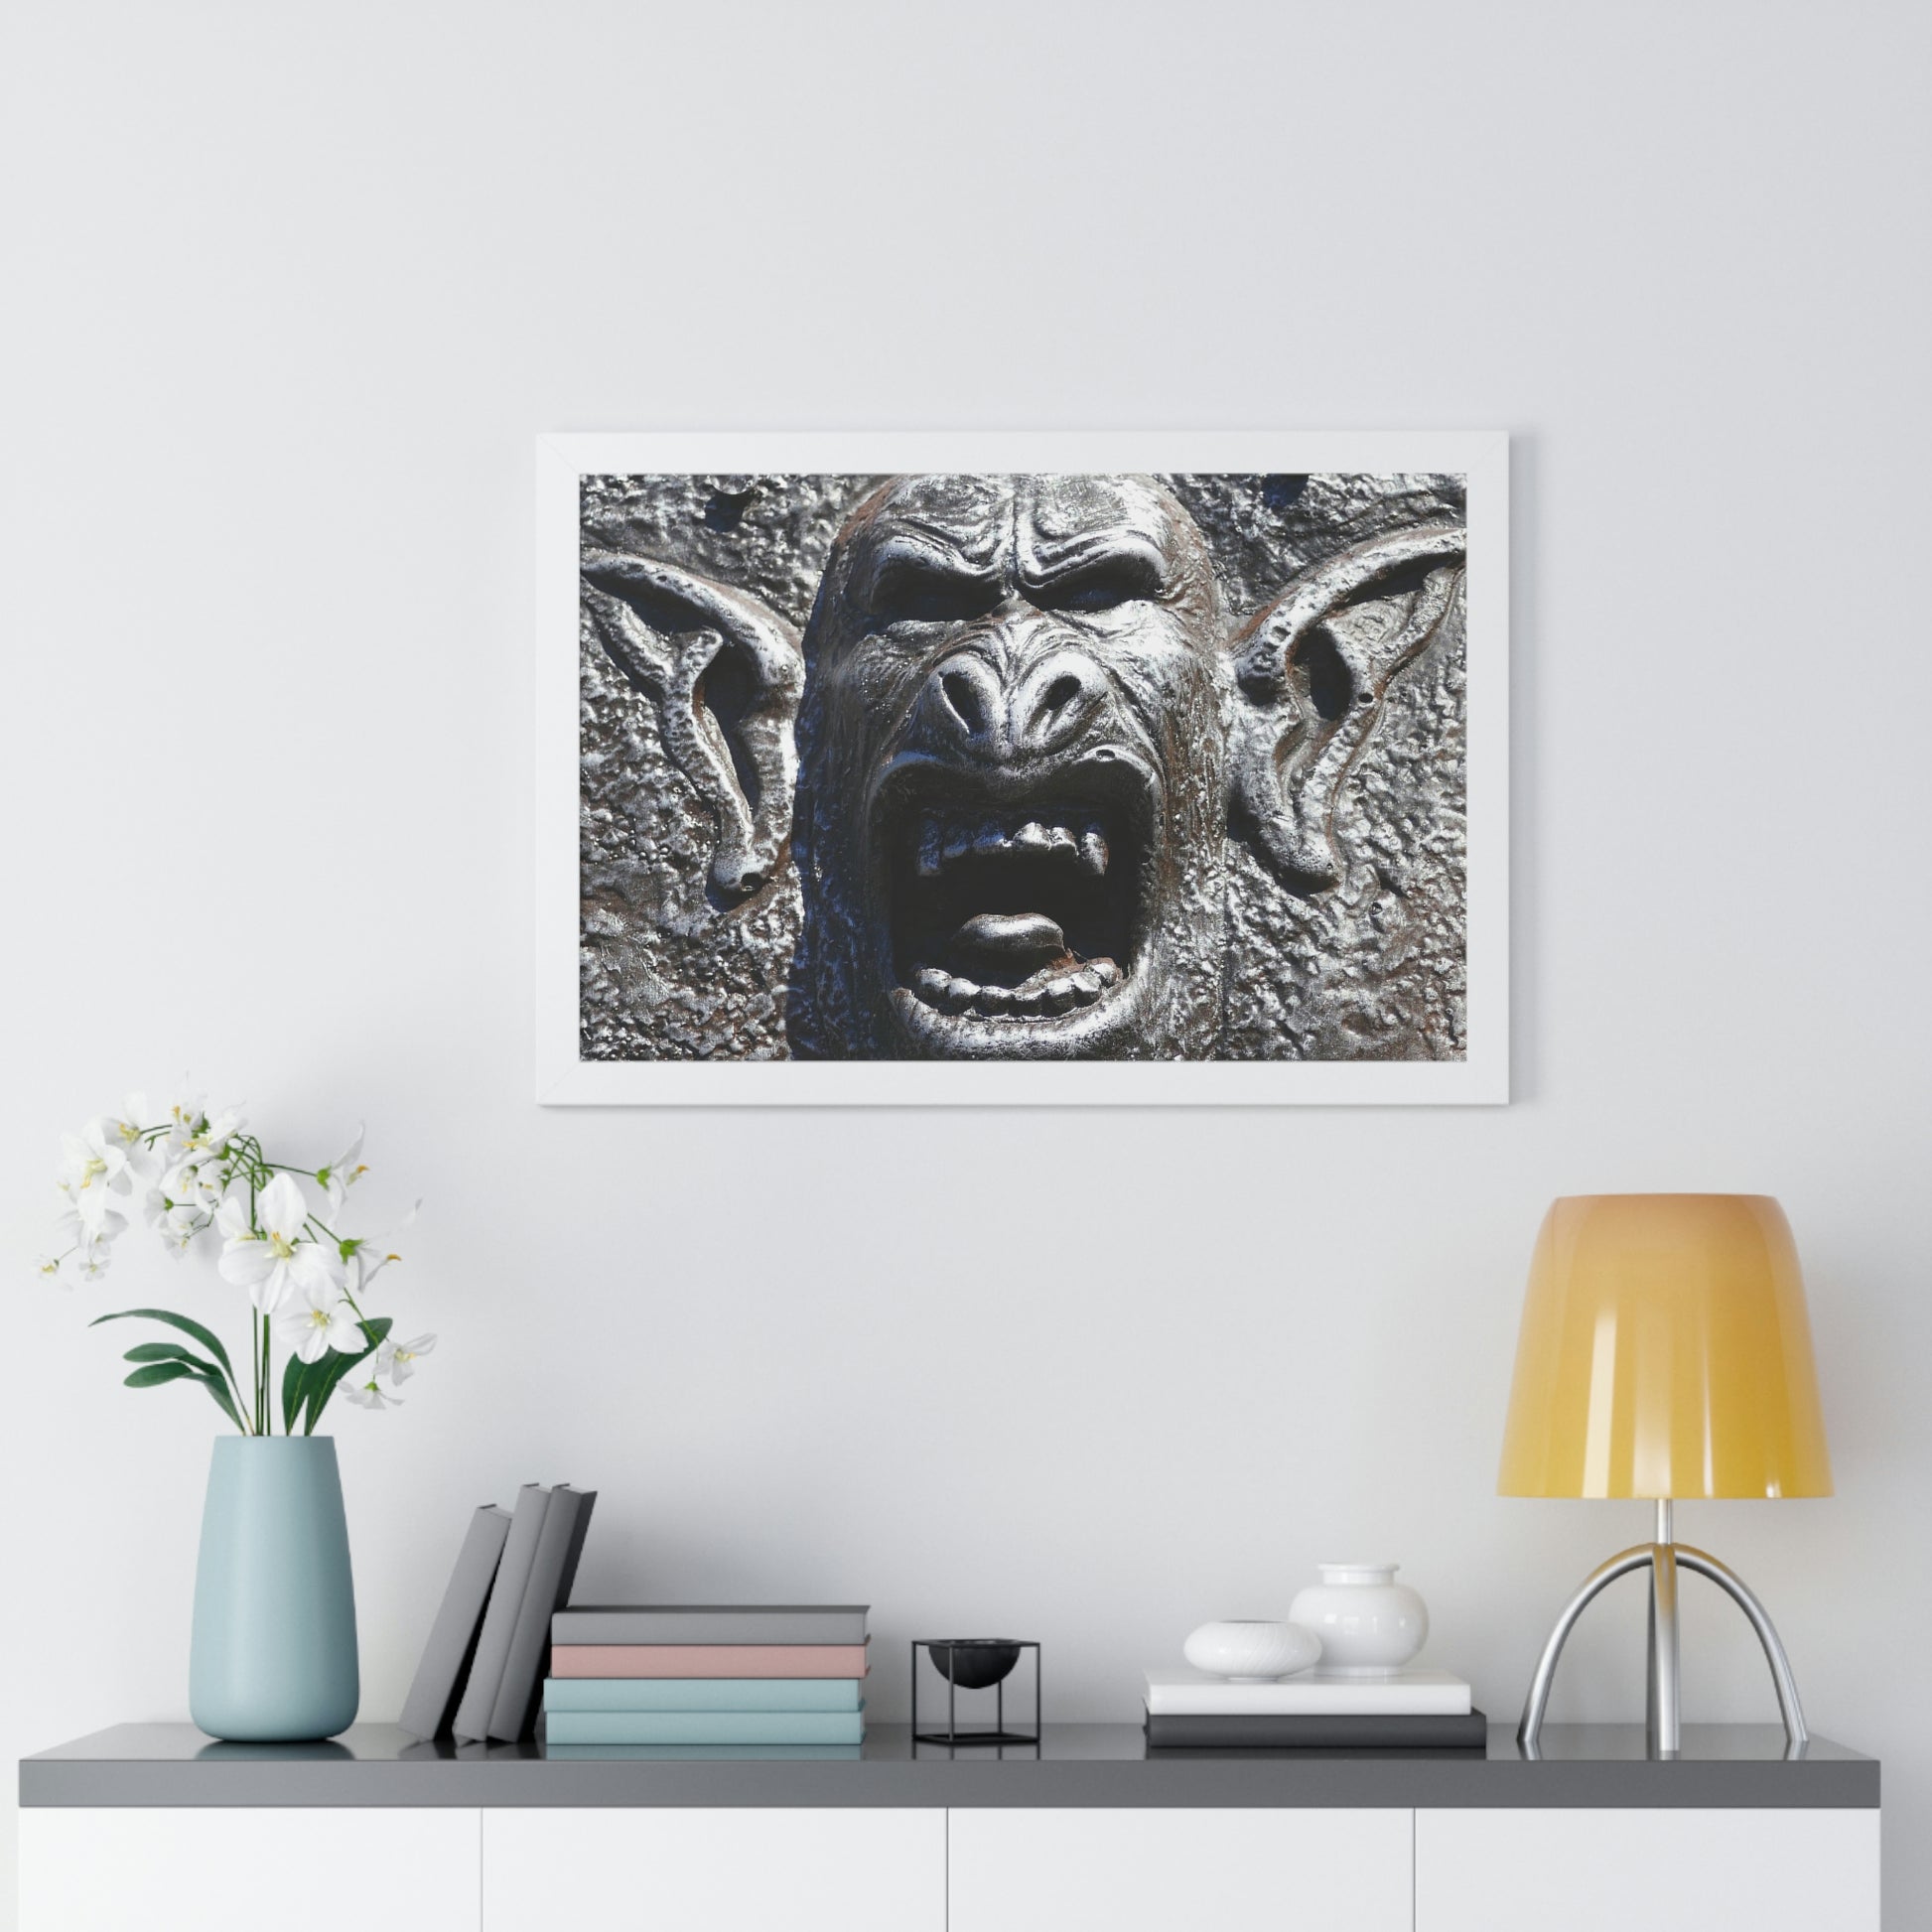 Frenzy Scream - Framed Horizontal Poster - Fry1Productions